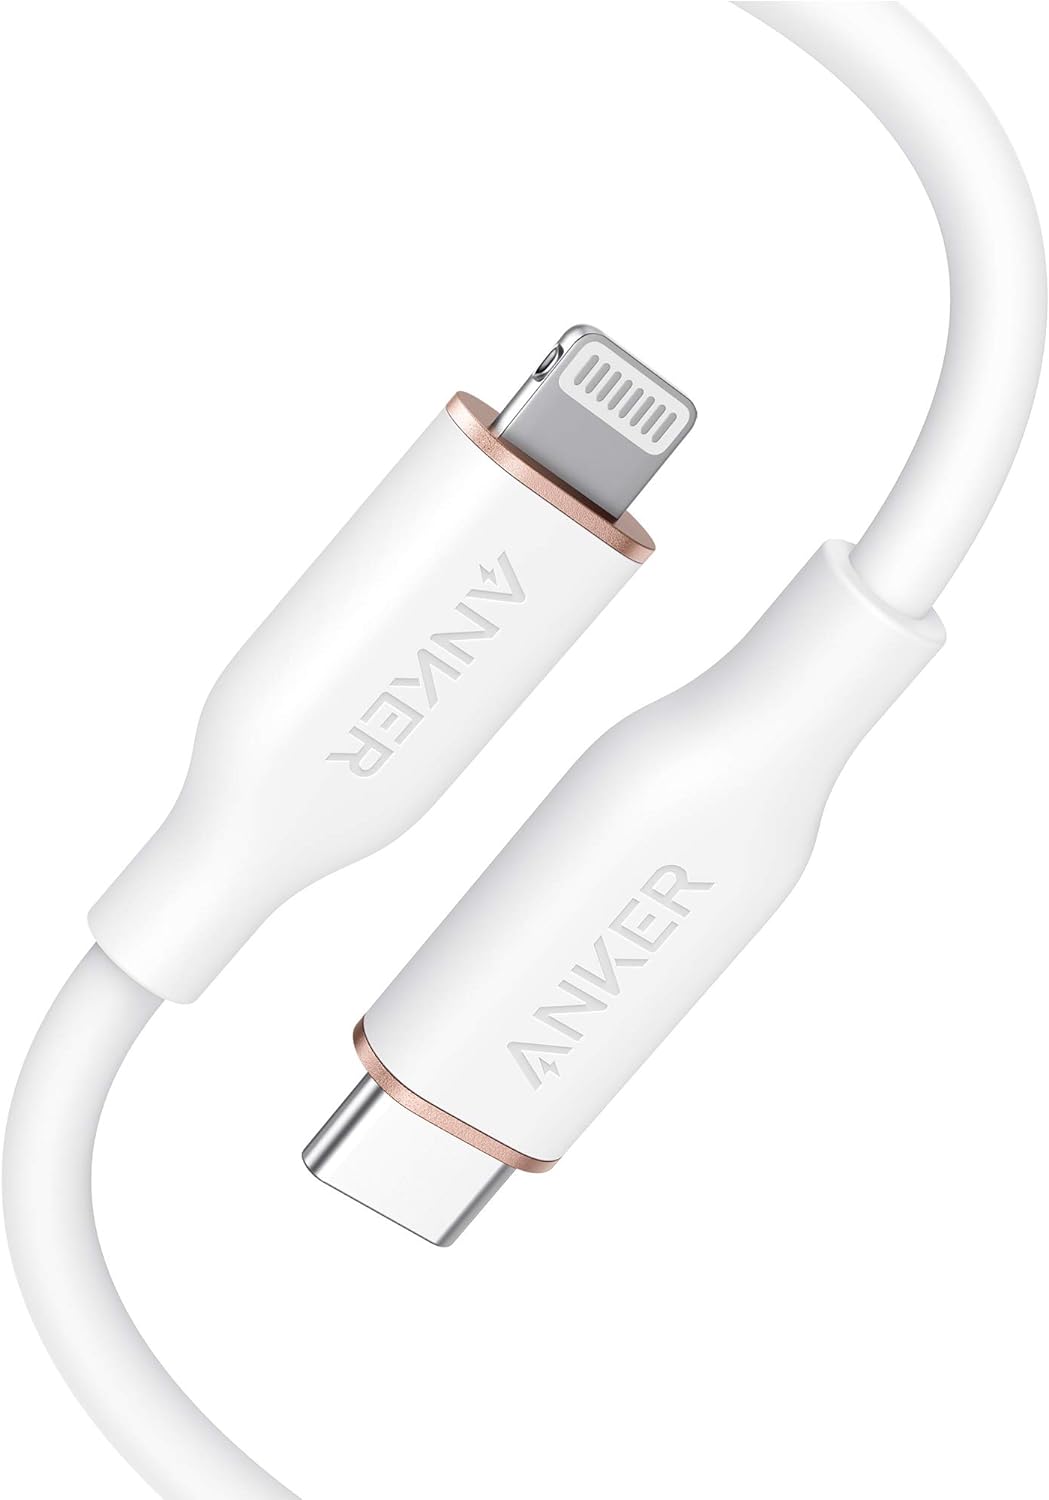 Anker PowerLine lll Flow USB-C with Lightning Connector (6ft) - Miles Telecom Trading LLC